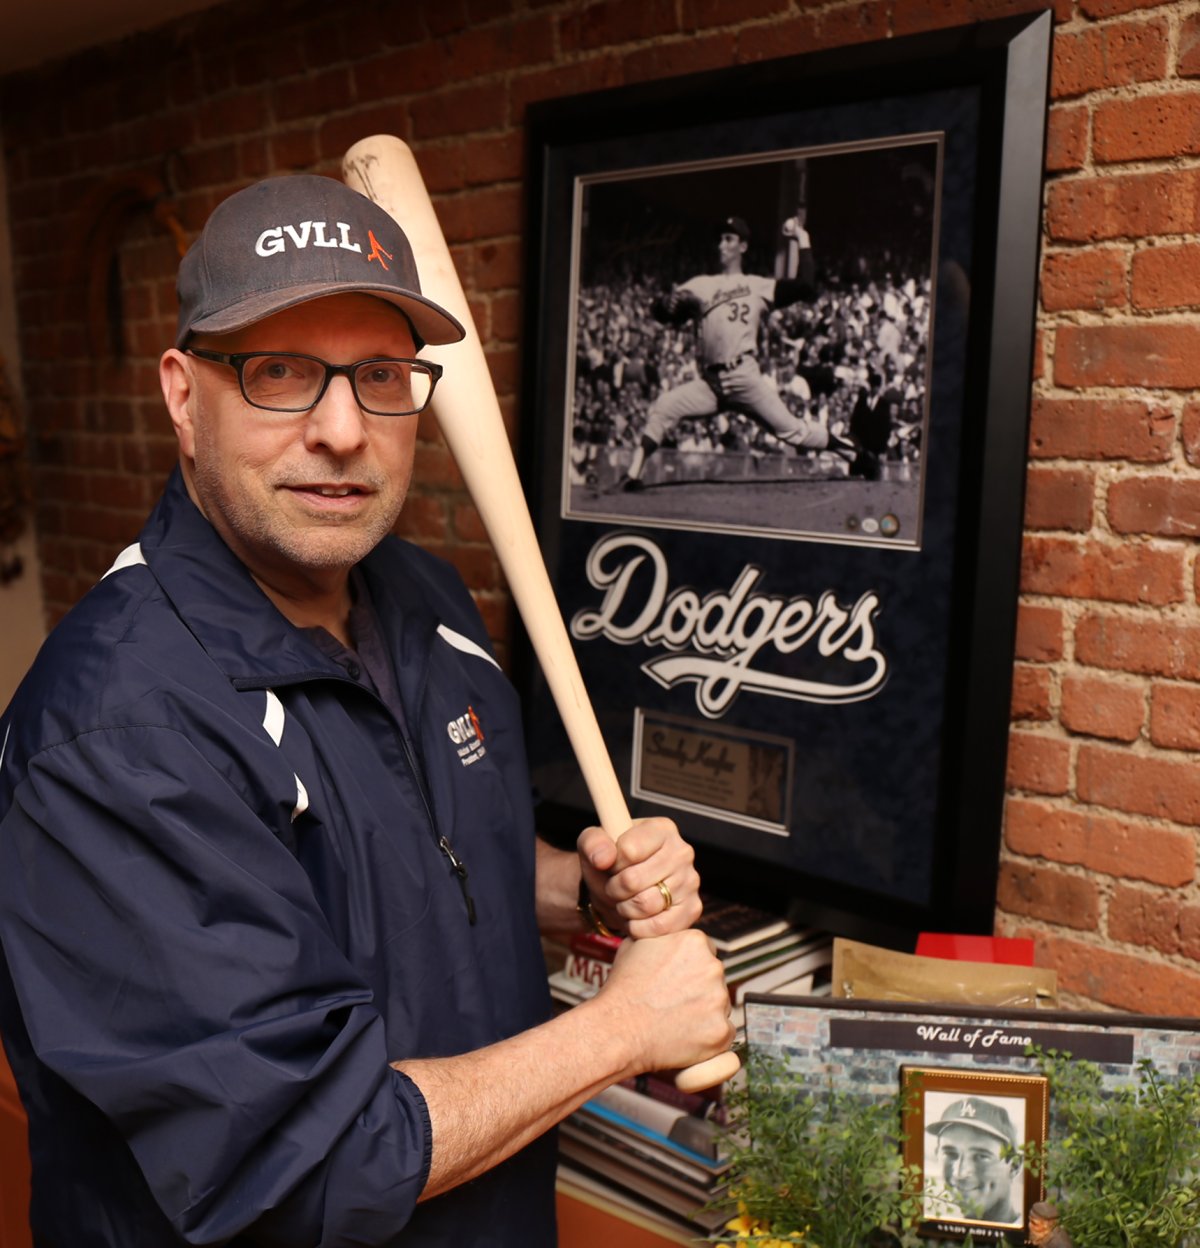 Ready to take his swings: New G.V.L.L. President Michael Schneider in front of a photo of one of his idols, Sandy Koufax, the legendary lefty. Schneider’s e-mail address has “koufax” in it and his poodle is named Koufax, too. Photo by Tequila Minsky